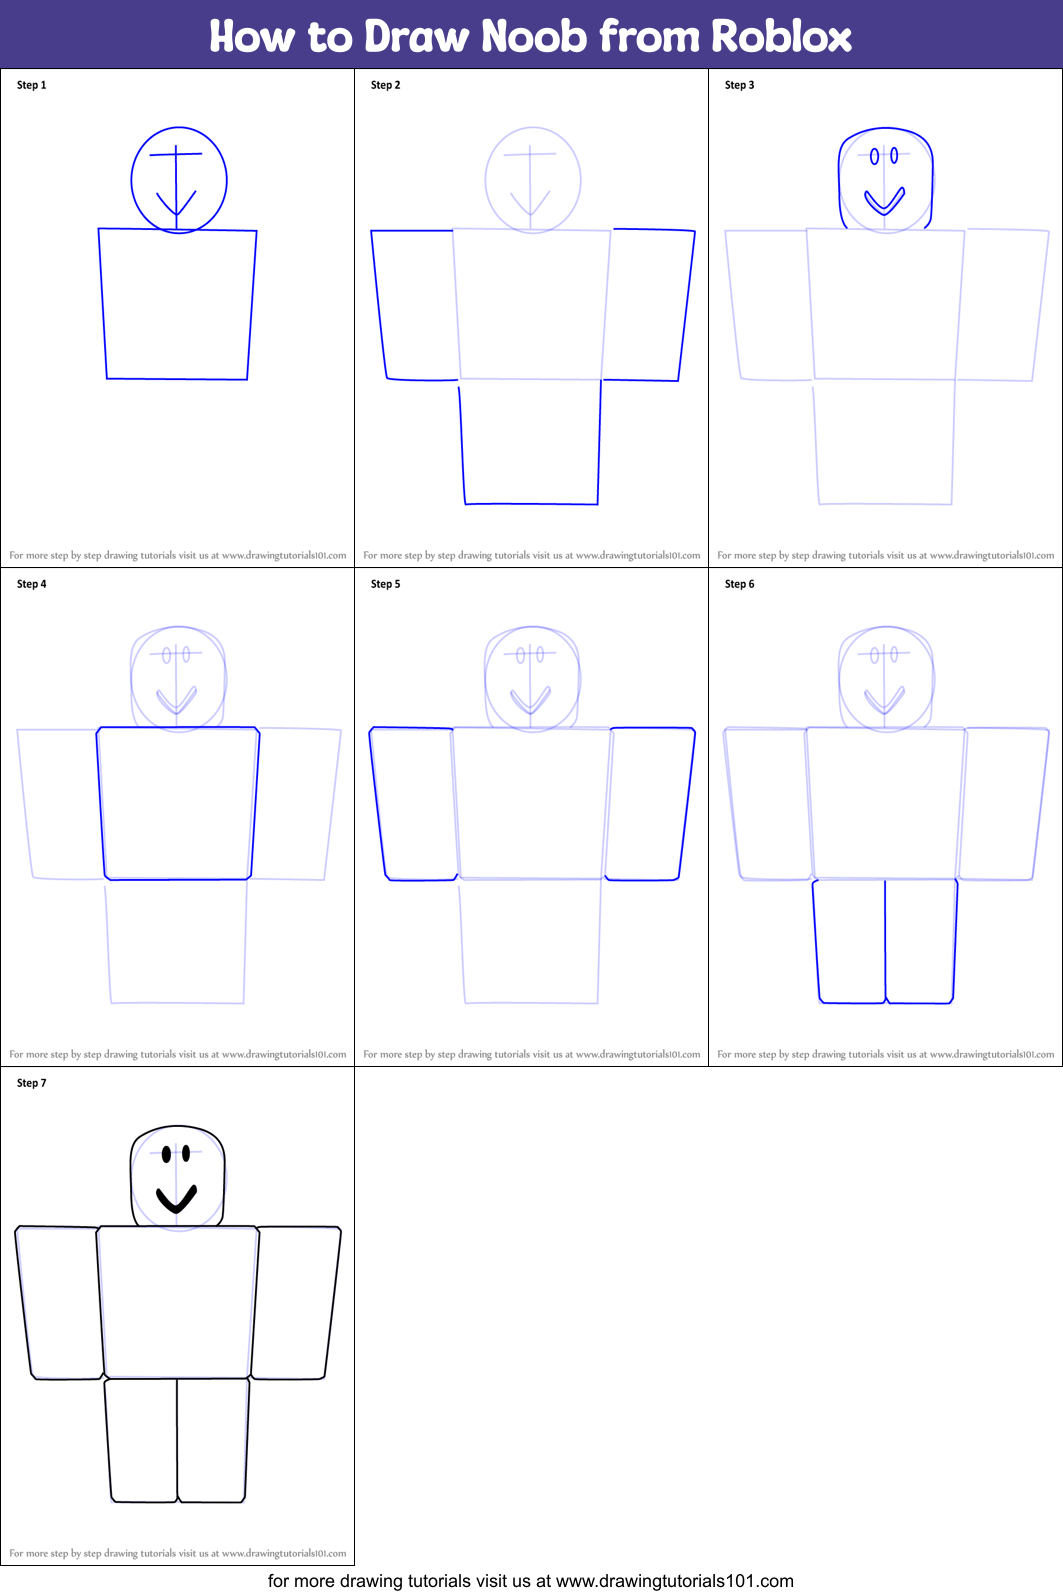 How To Draw A Roblox Person Choose roblox image you will be redirect to